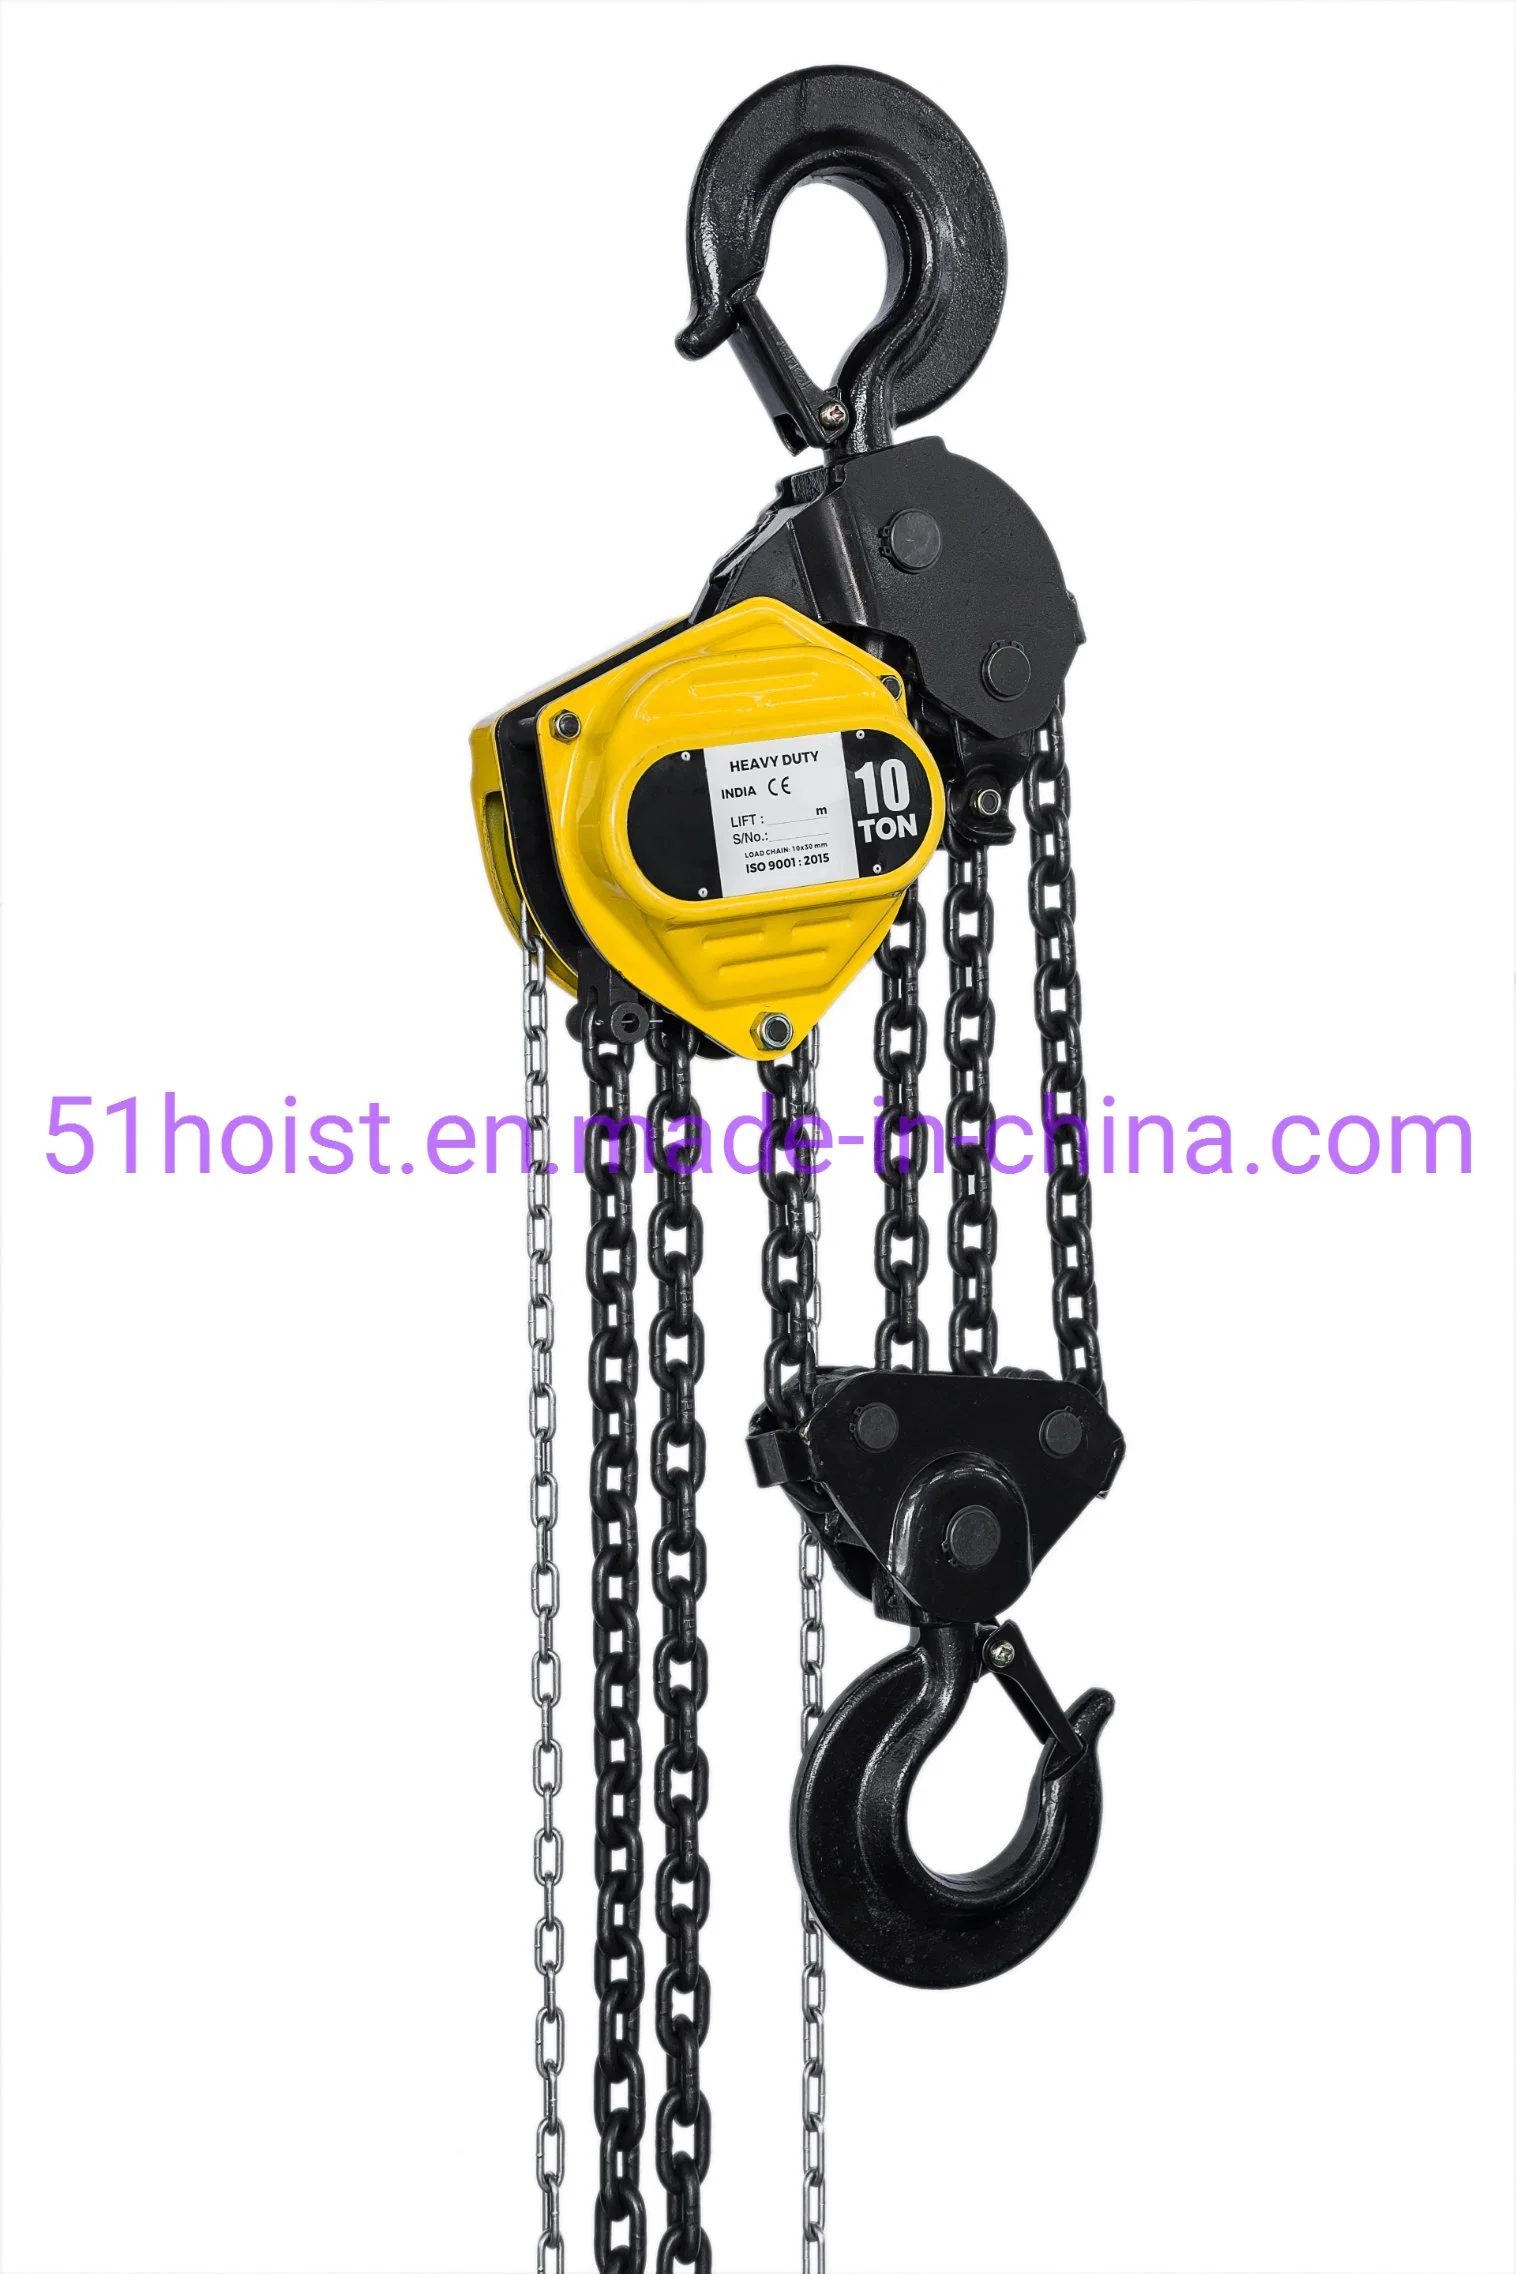 HS-J Type 10 Ton 3m Chain Pulley Block with G80 Load Chain